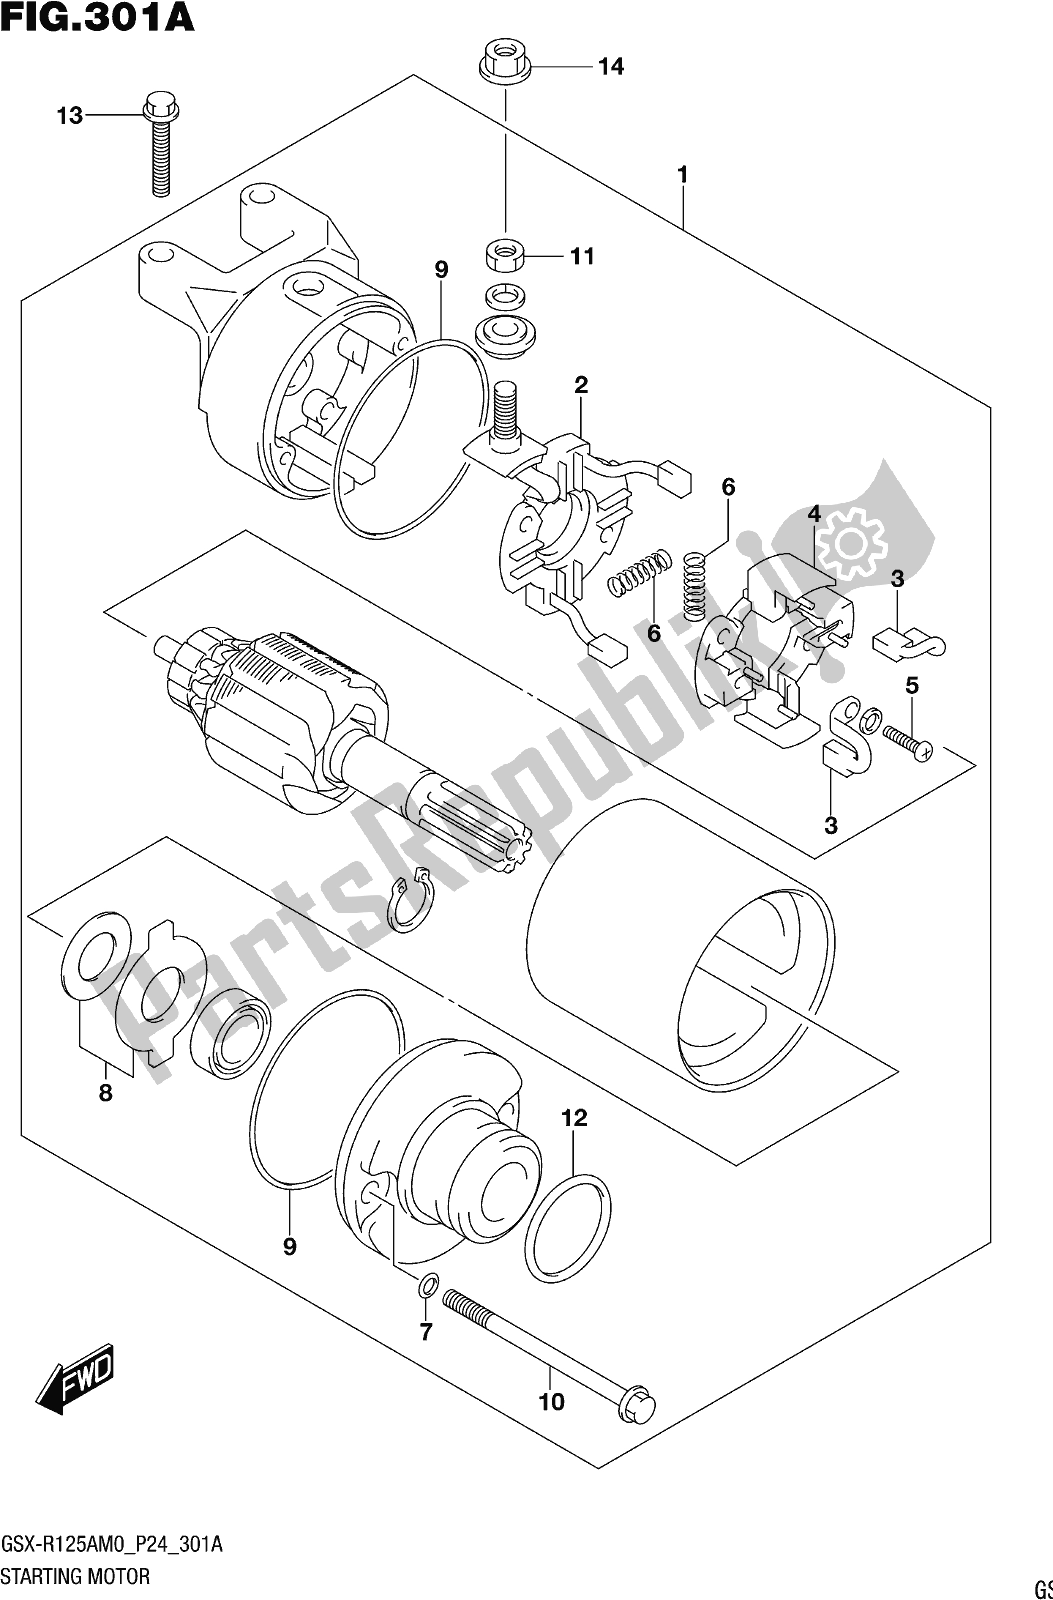 All parts for the Fig. 301a Starting Motor of the Suzuki Gsx-r 125A 2020